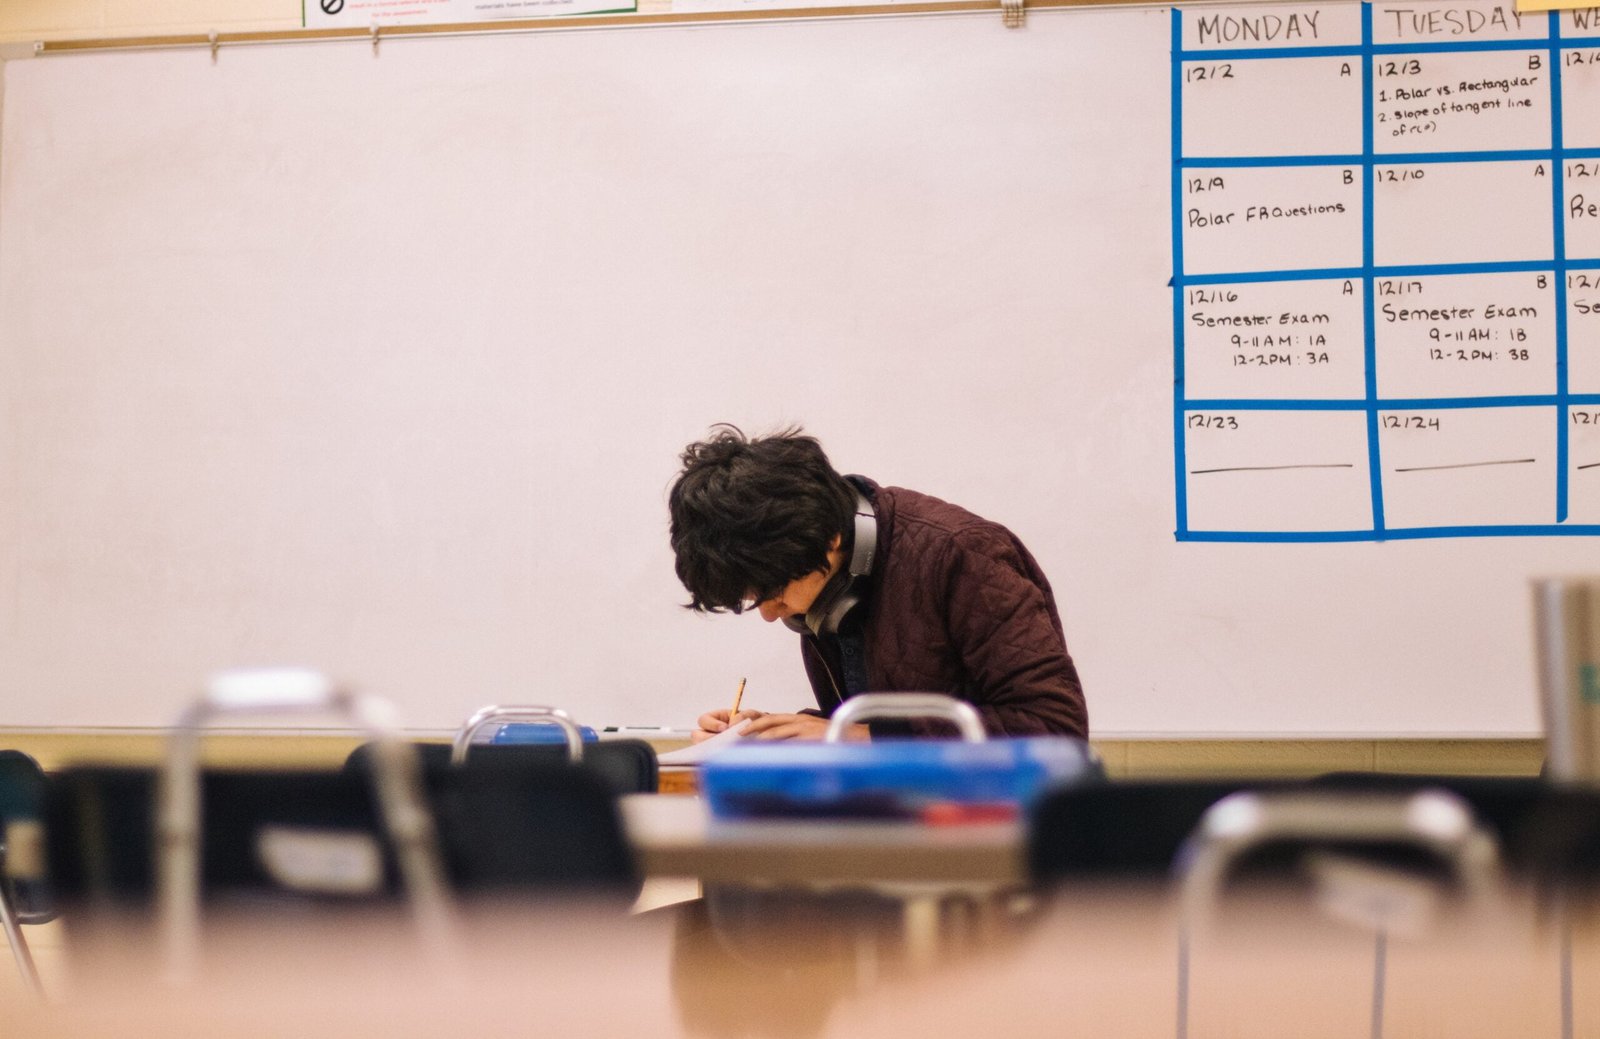 Photograph of a student taking a test